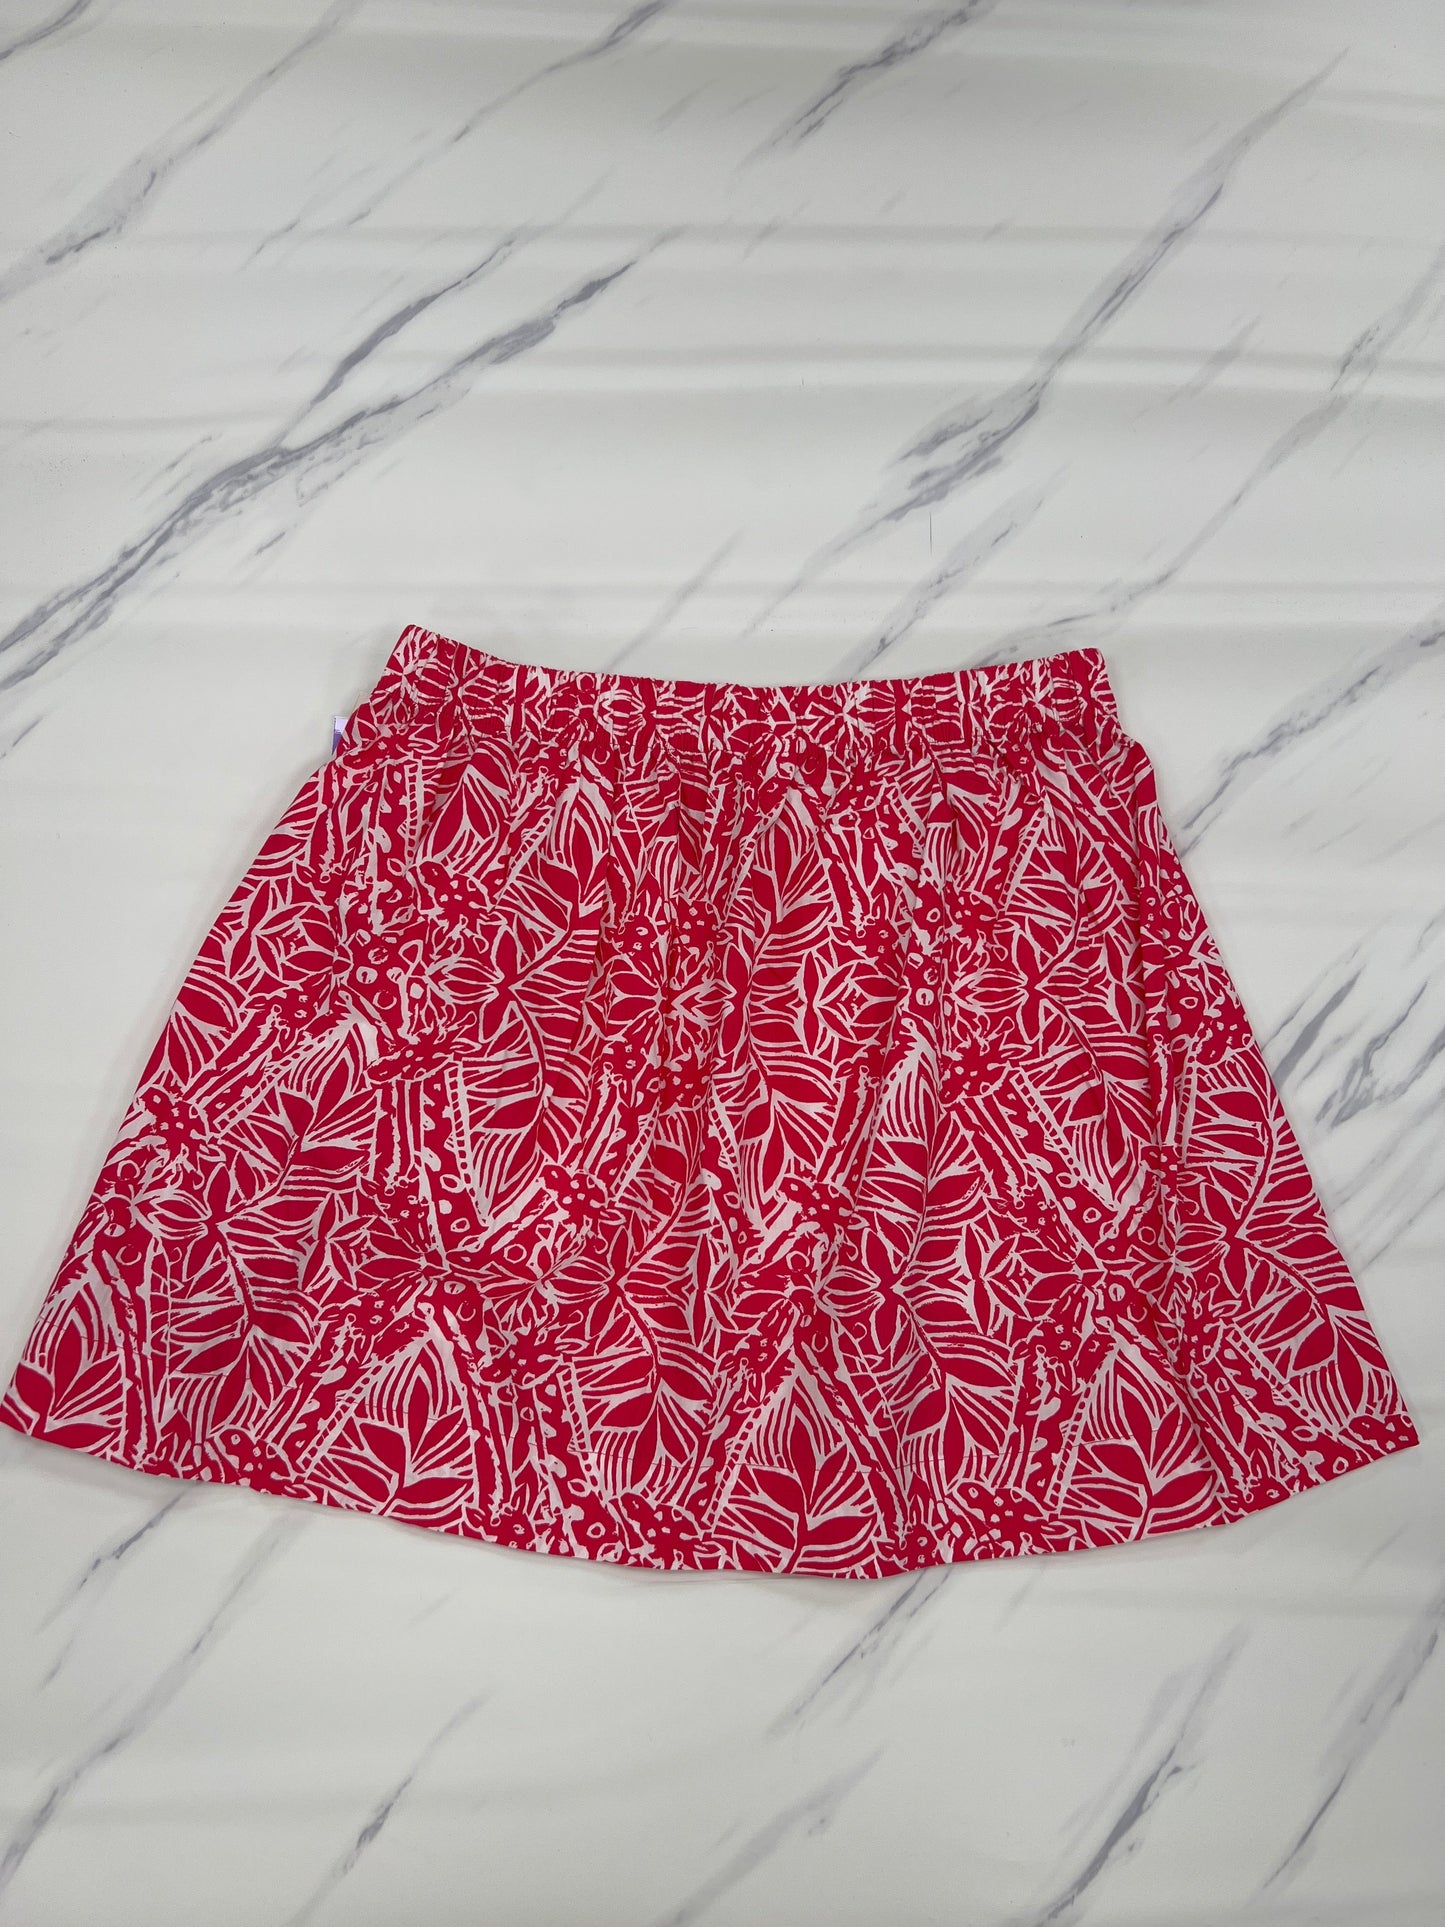 Skirt Designer By Lilly Pulitzer  Size: L